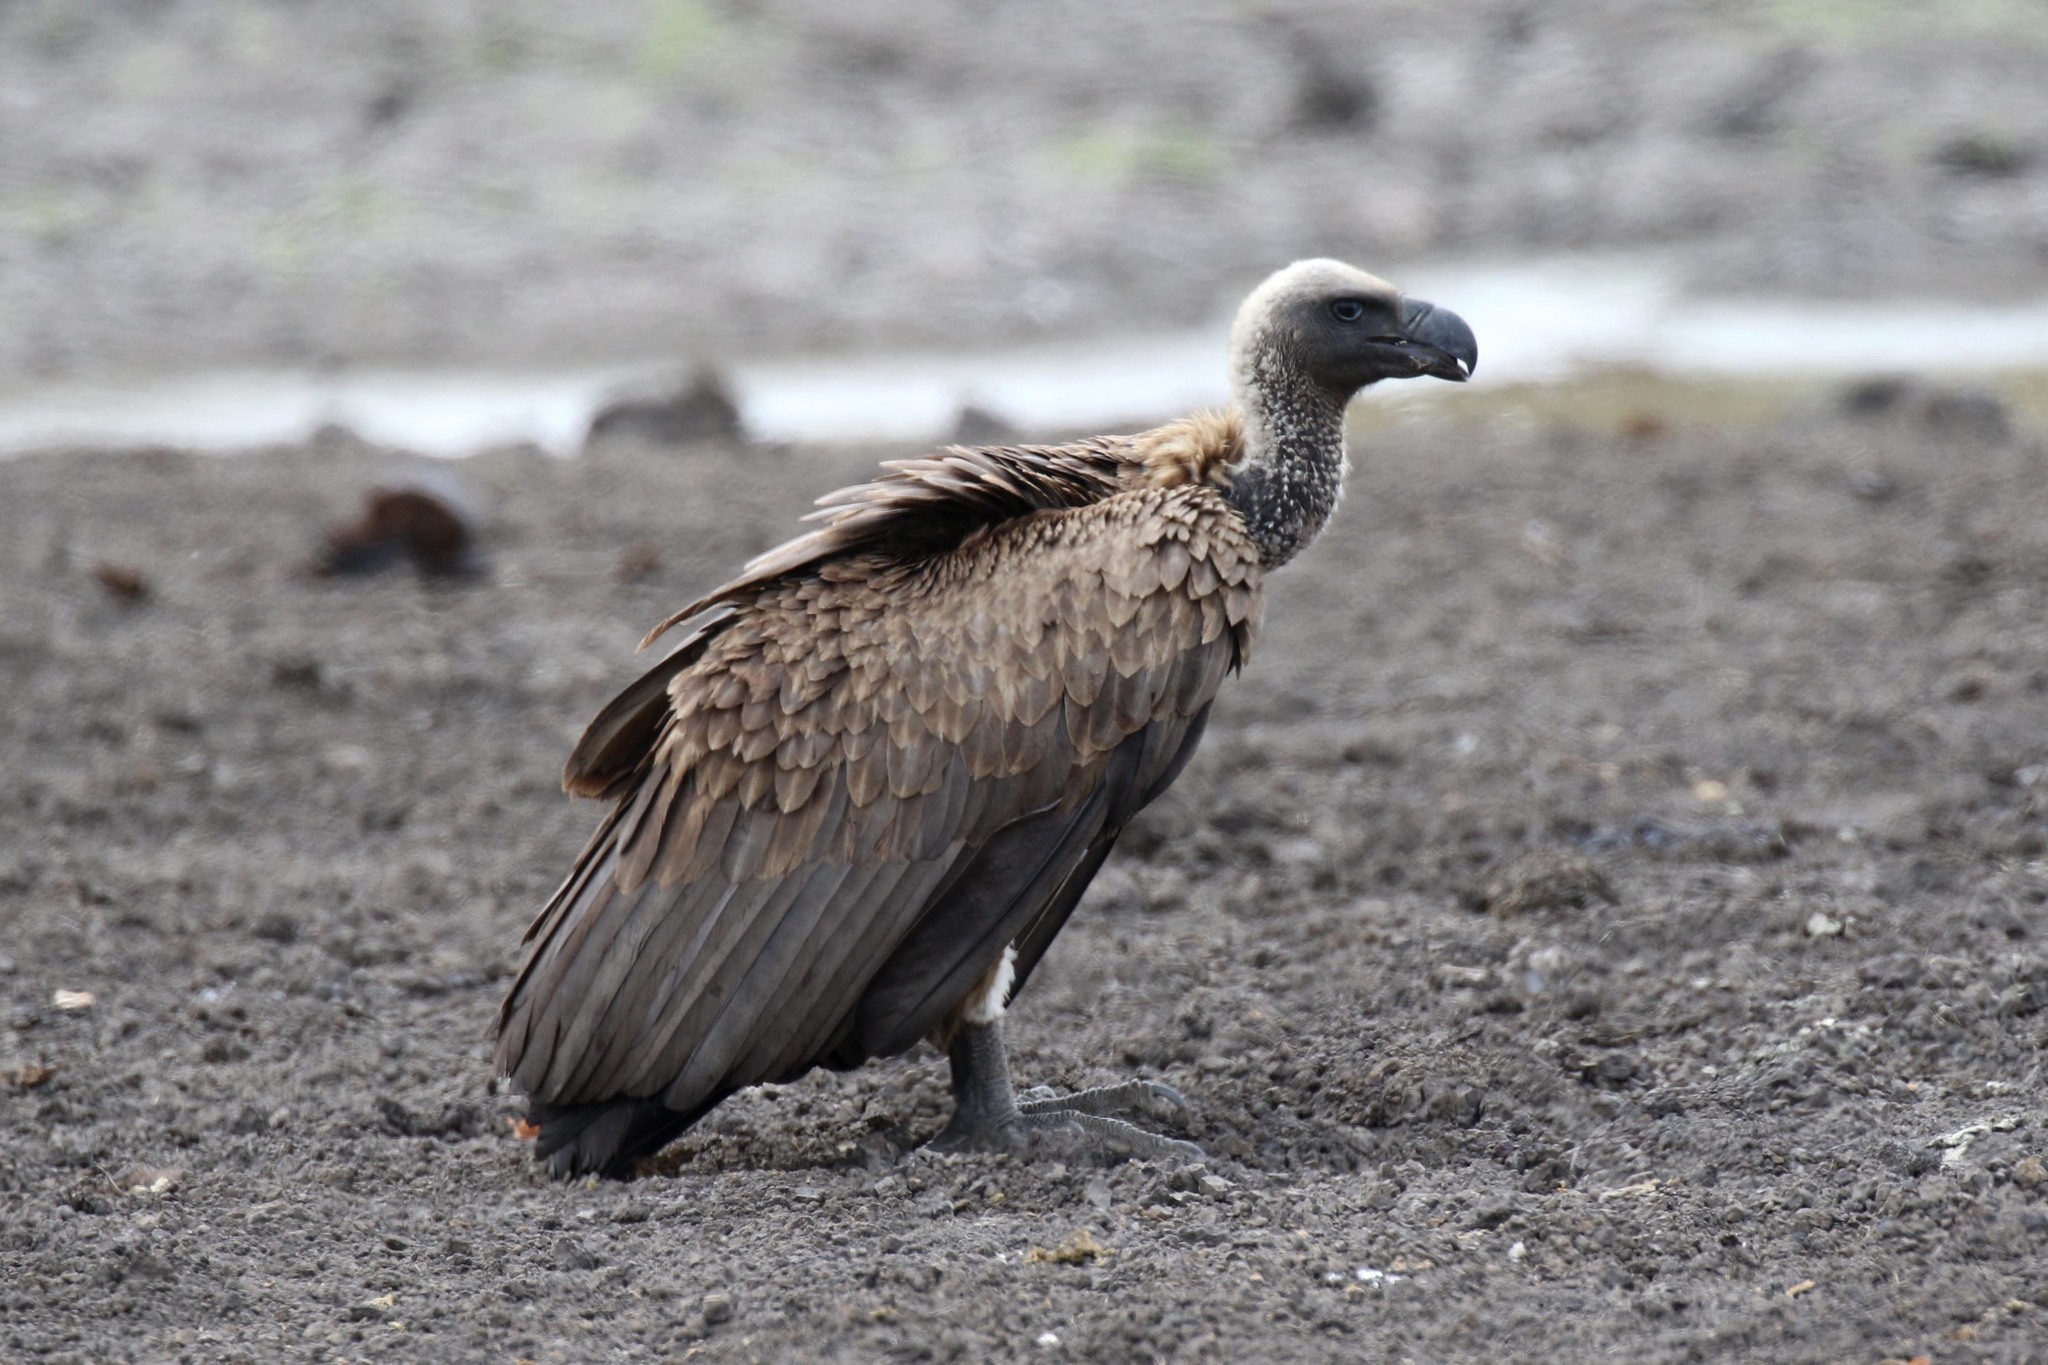 White-backed vulture, facts and photos